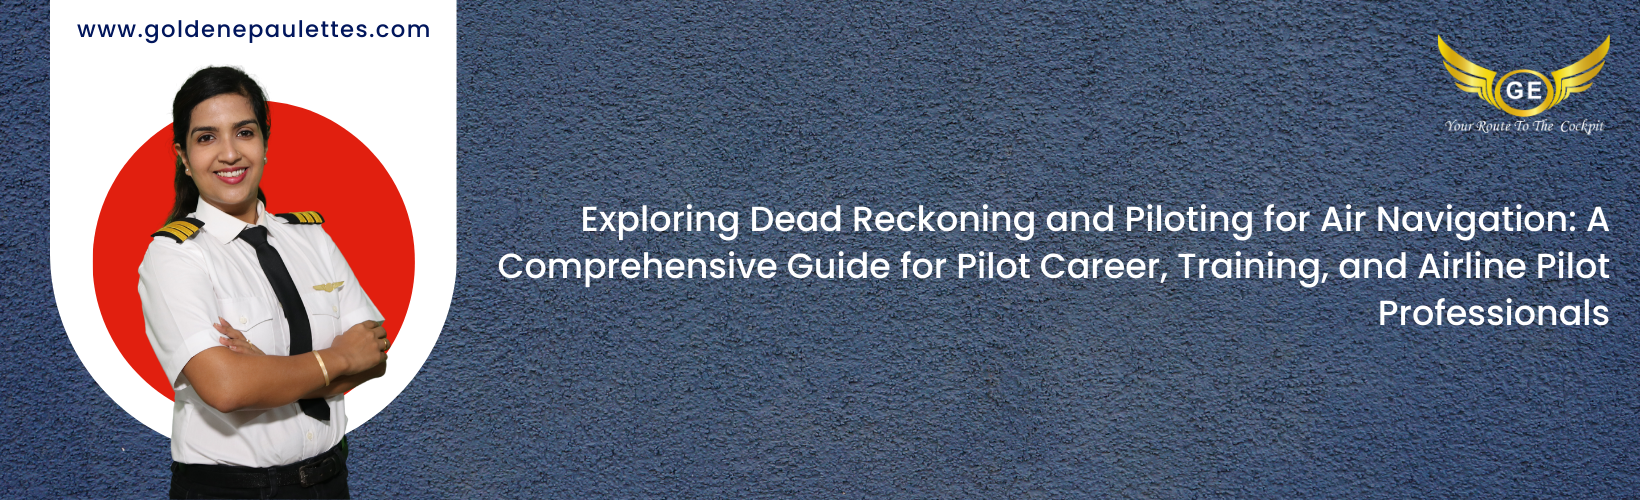 Exploring Dead Reckoning and Piloting for Air Navigation